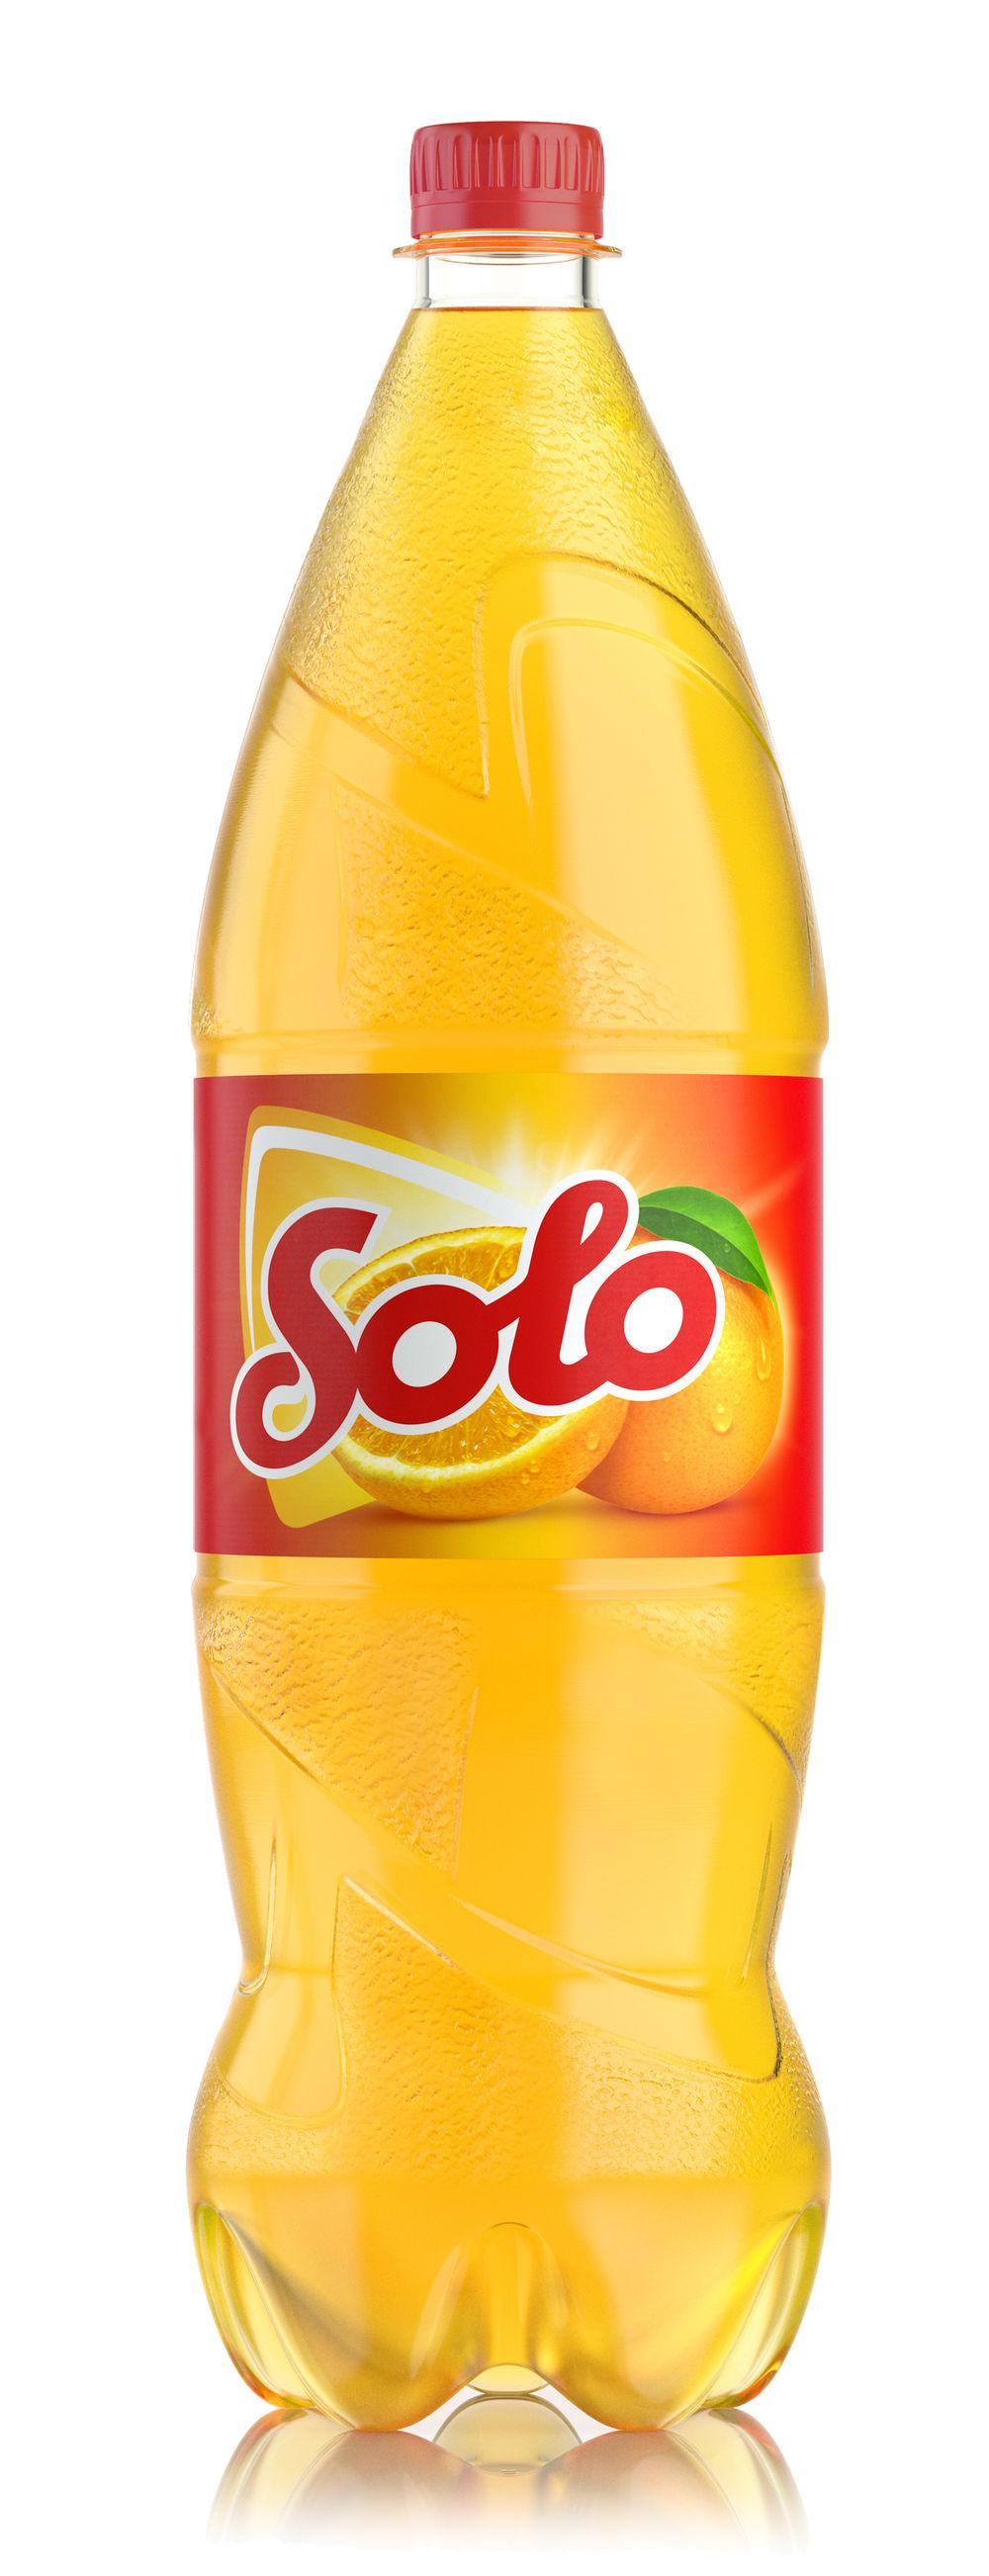 Solo 1,50 l - inkl. pant